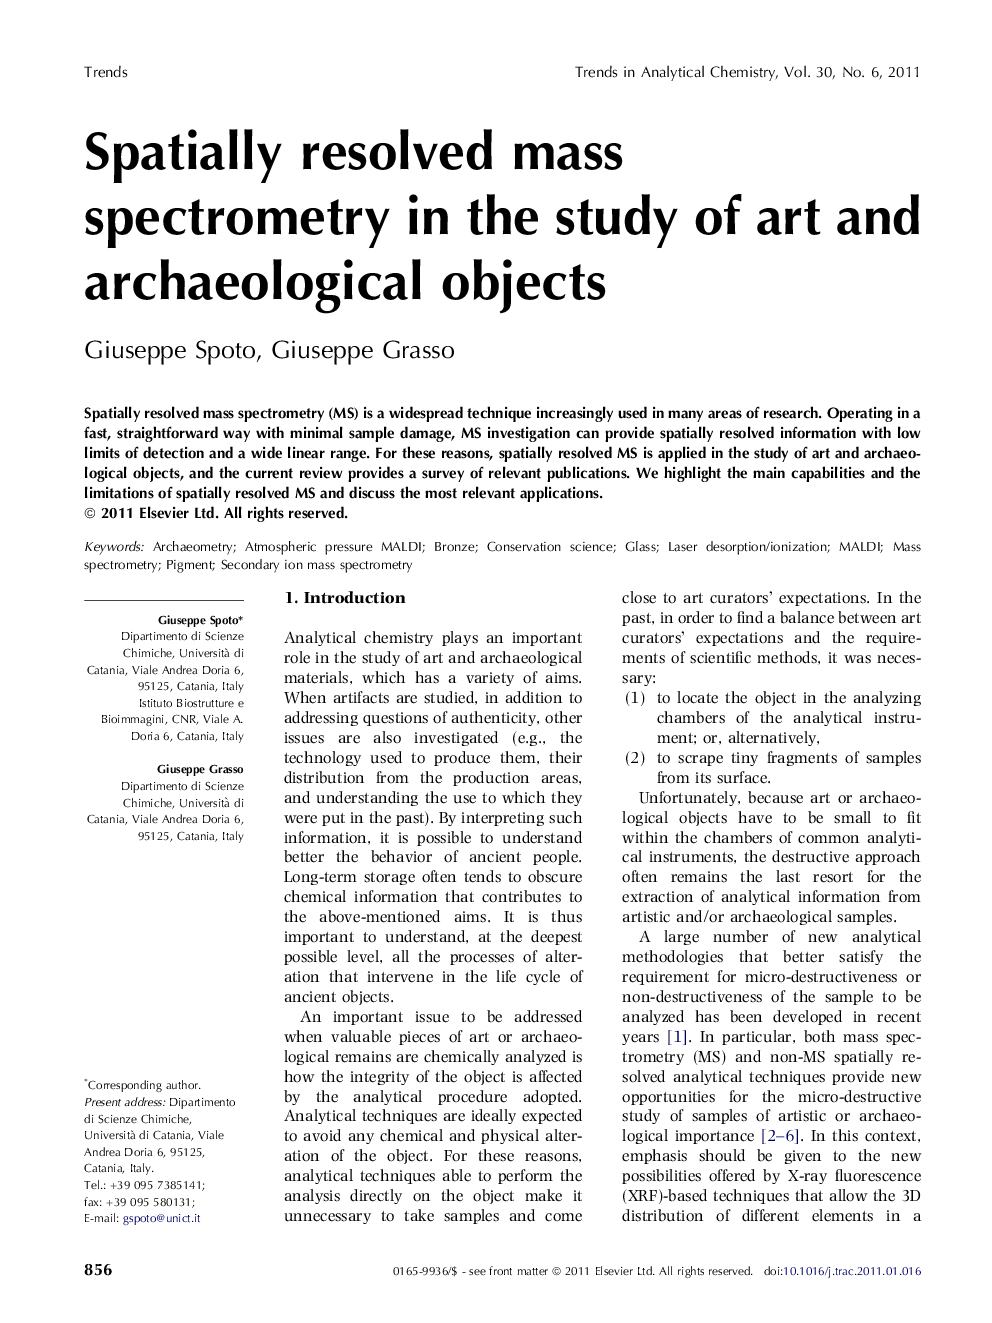 Spatially resolved mass spectrometry in the study of art and archaeological objects